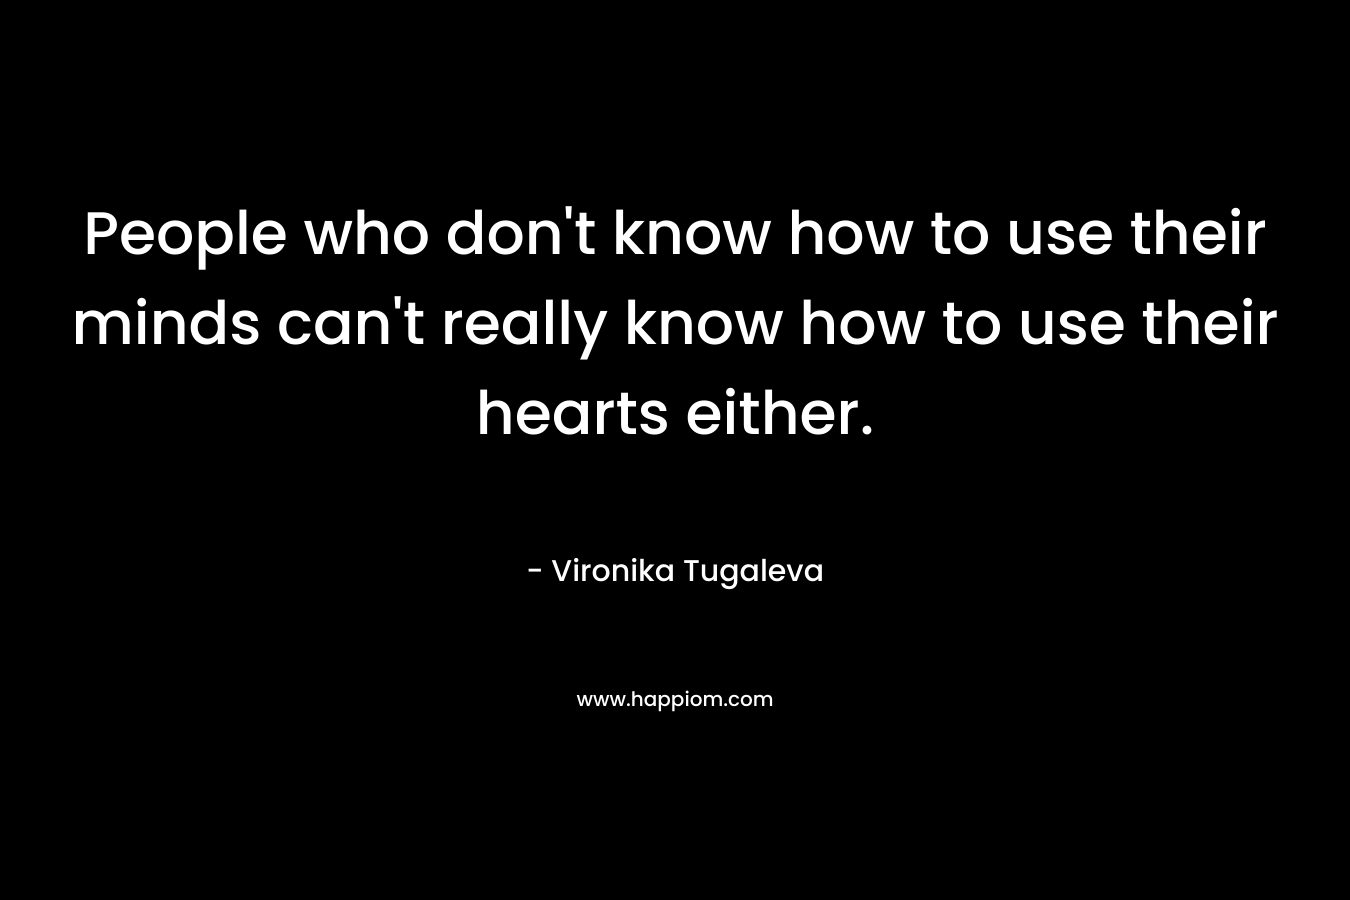 People who don't know how to use their minds can't really know how to use their hearts either.